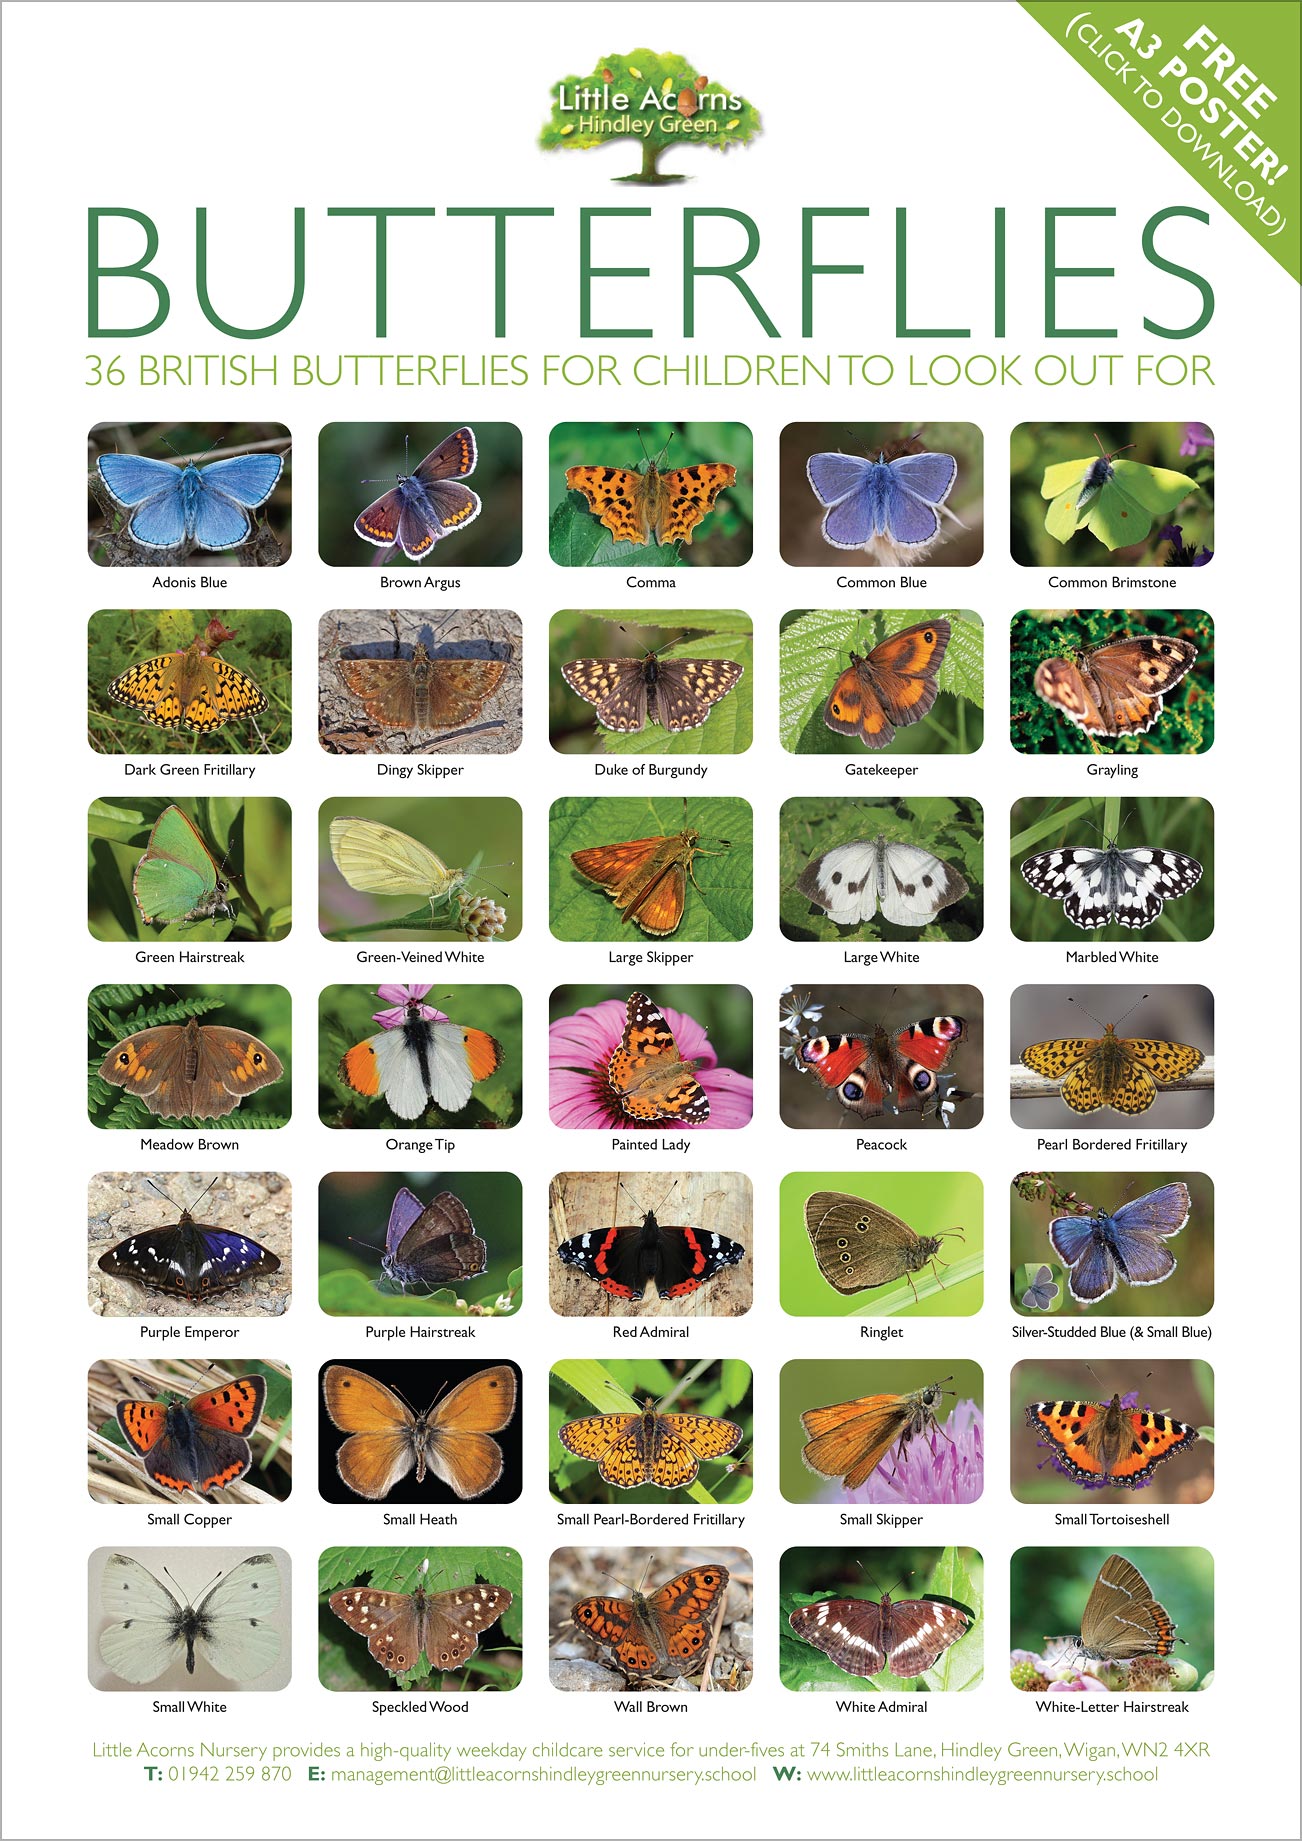 Free A3 British Butterflies poster to download or print.